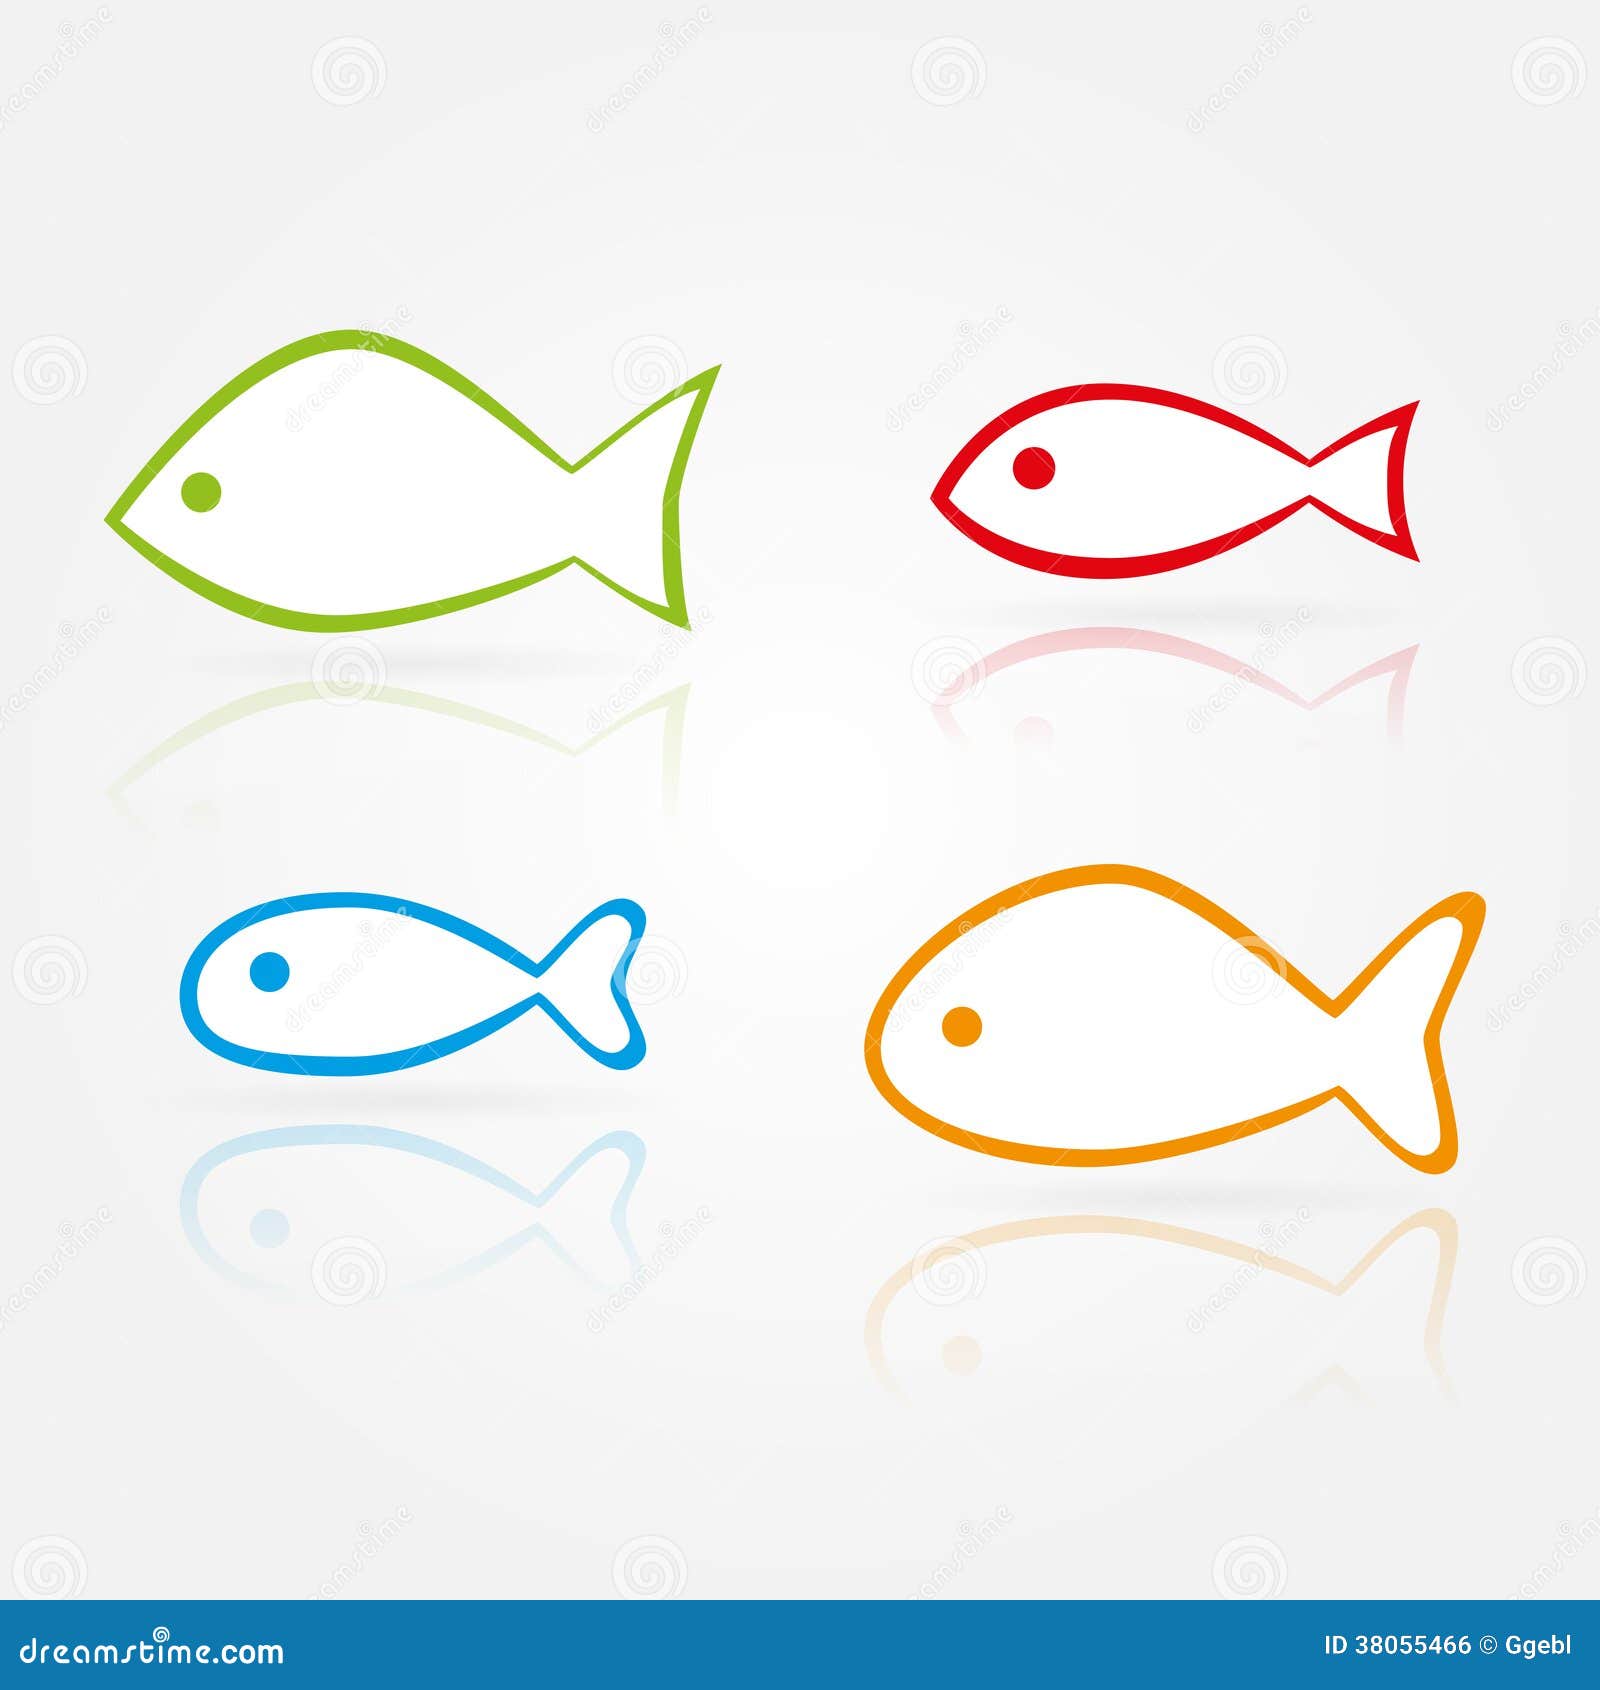 Vector fish silhouettes stock vector. Illustration of shadow - 38055466